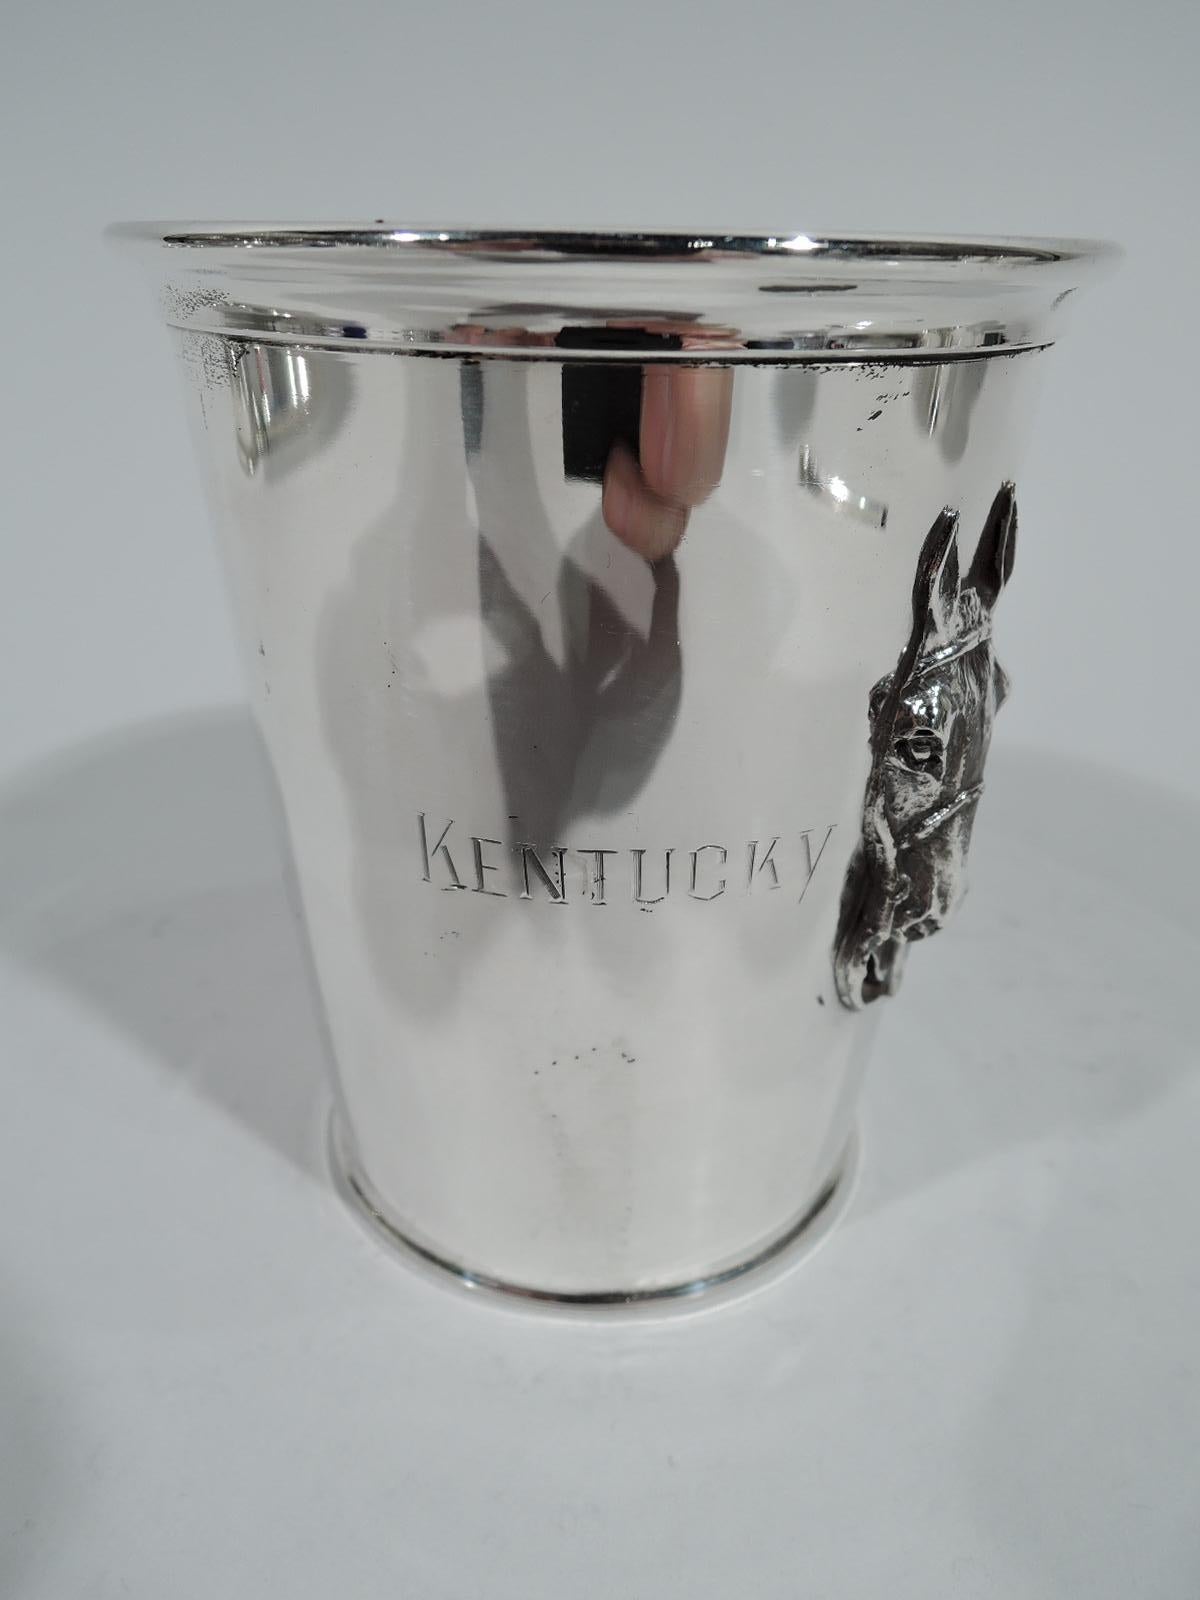 Horse head sterling silver mint julep cup. Made by Webster in North Attleboro, circa 1930. Straight and tapering sides, and molded rim. Applied horse head between engraved phrase “Kentucky Derby”. Fully marked and numbered 8555. Weight: 3.5 troy